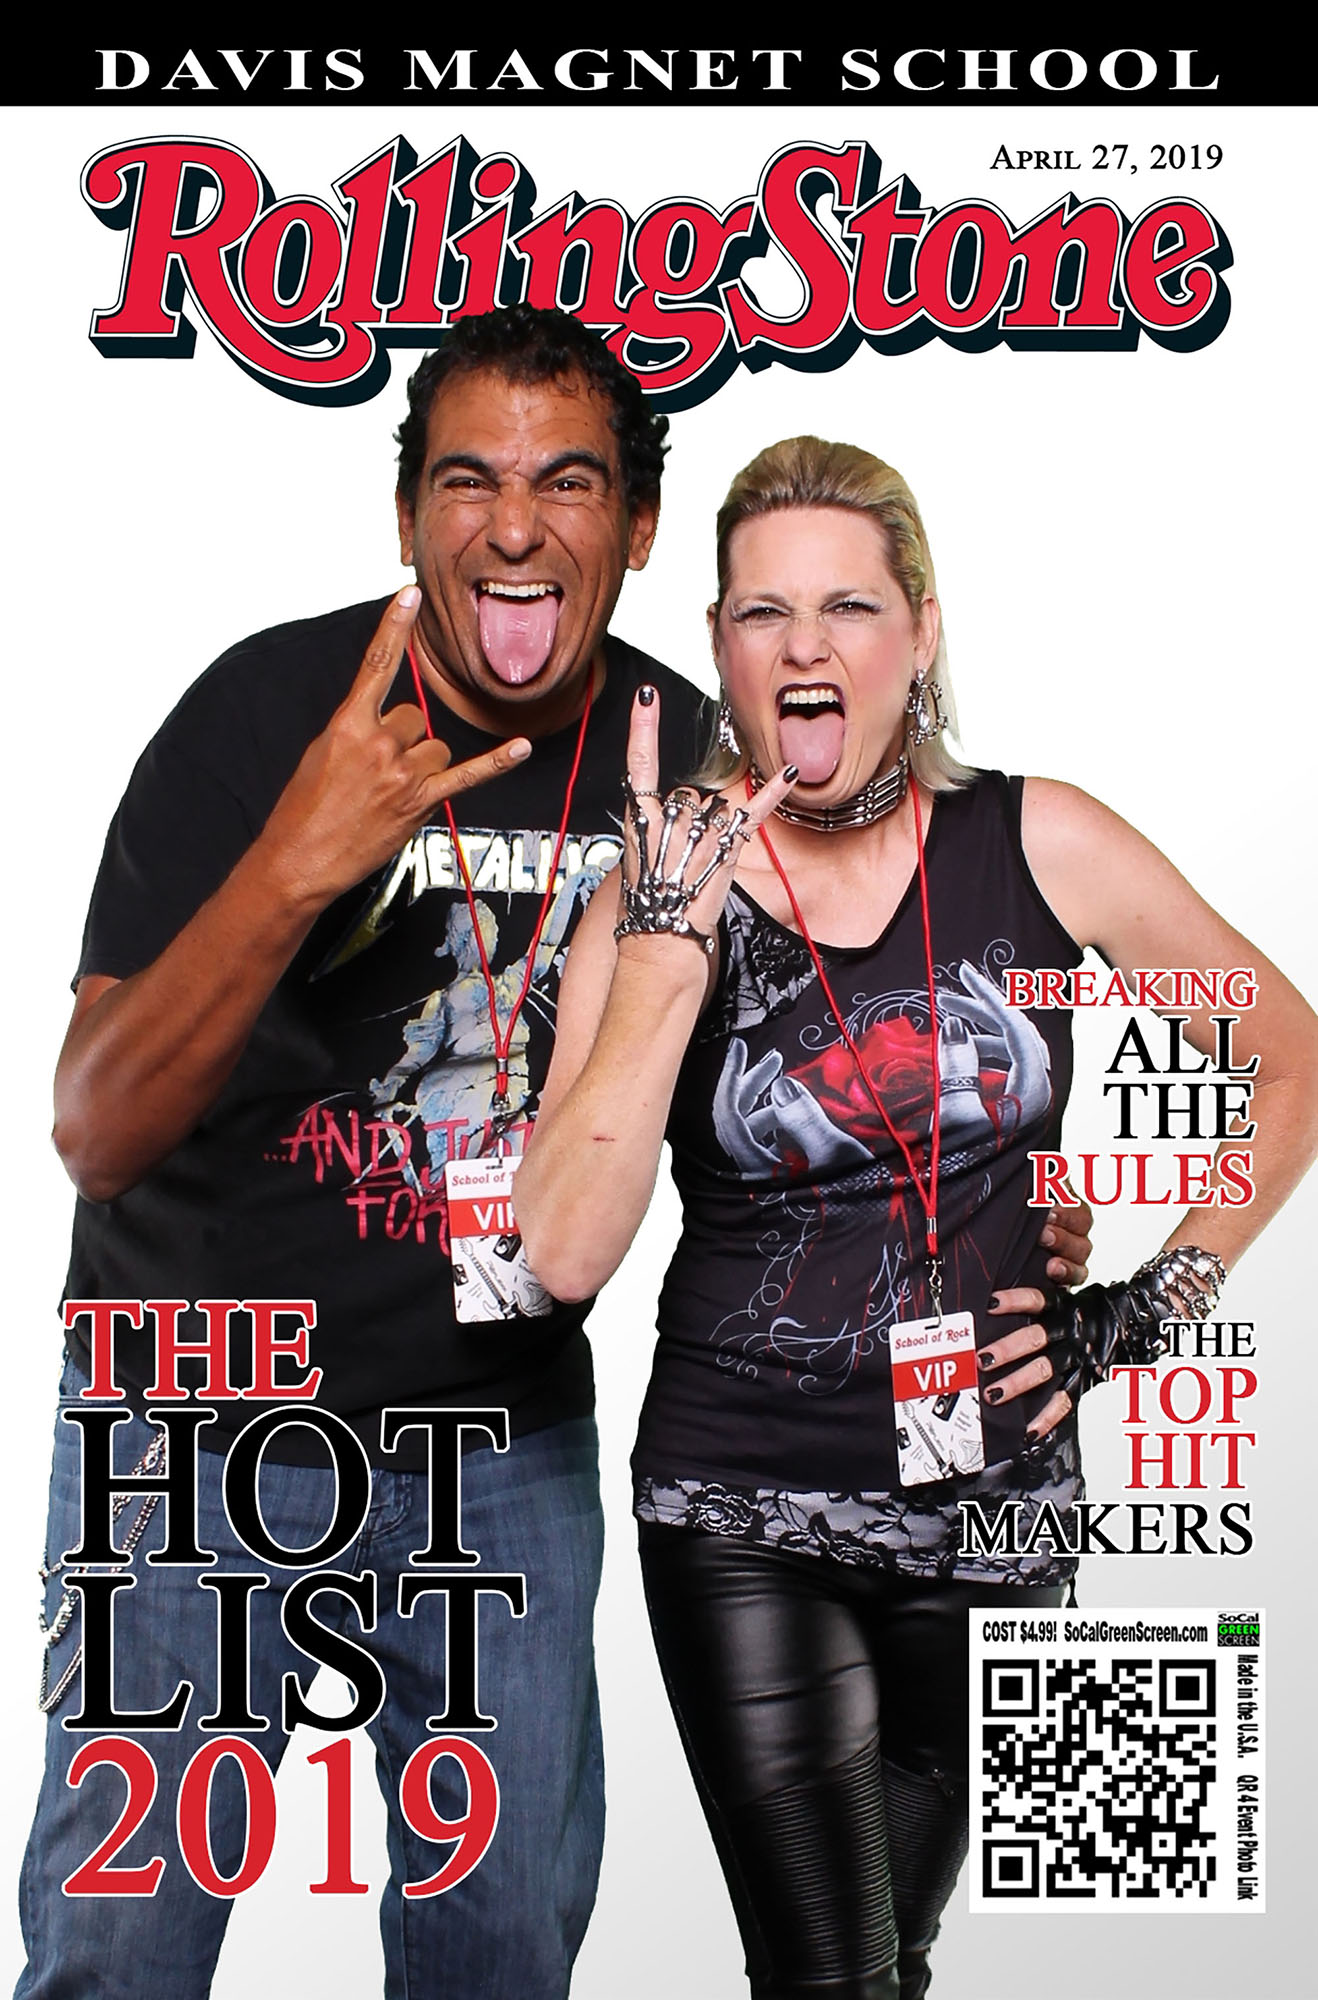 Two people Rocking out on the cover of a magazine